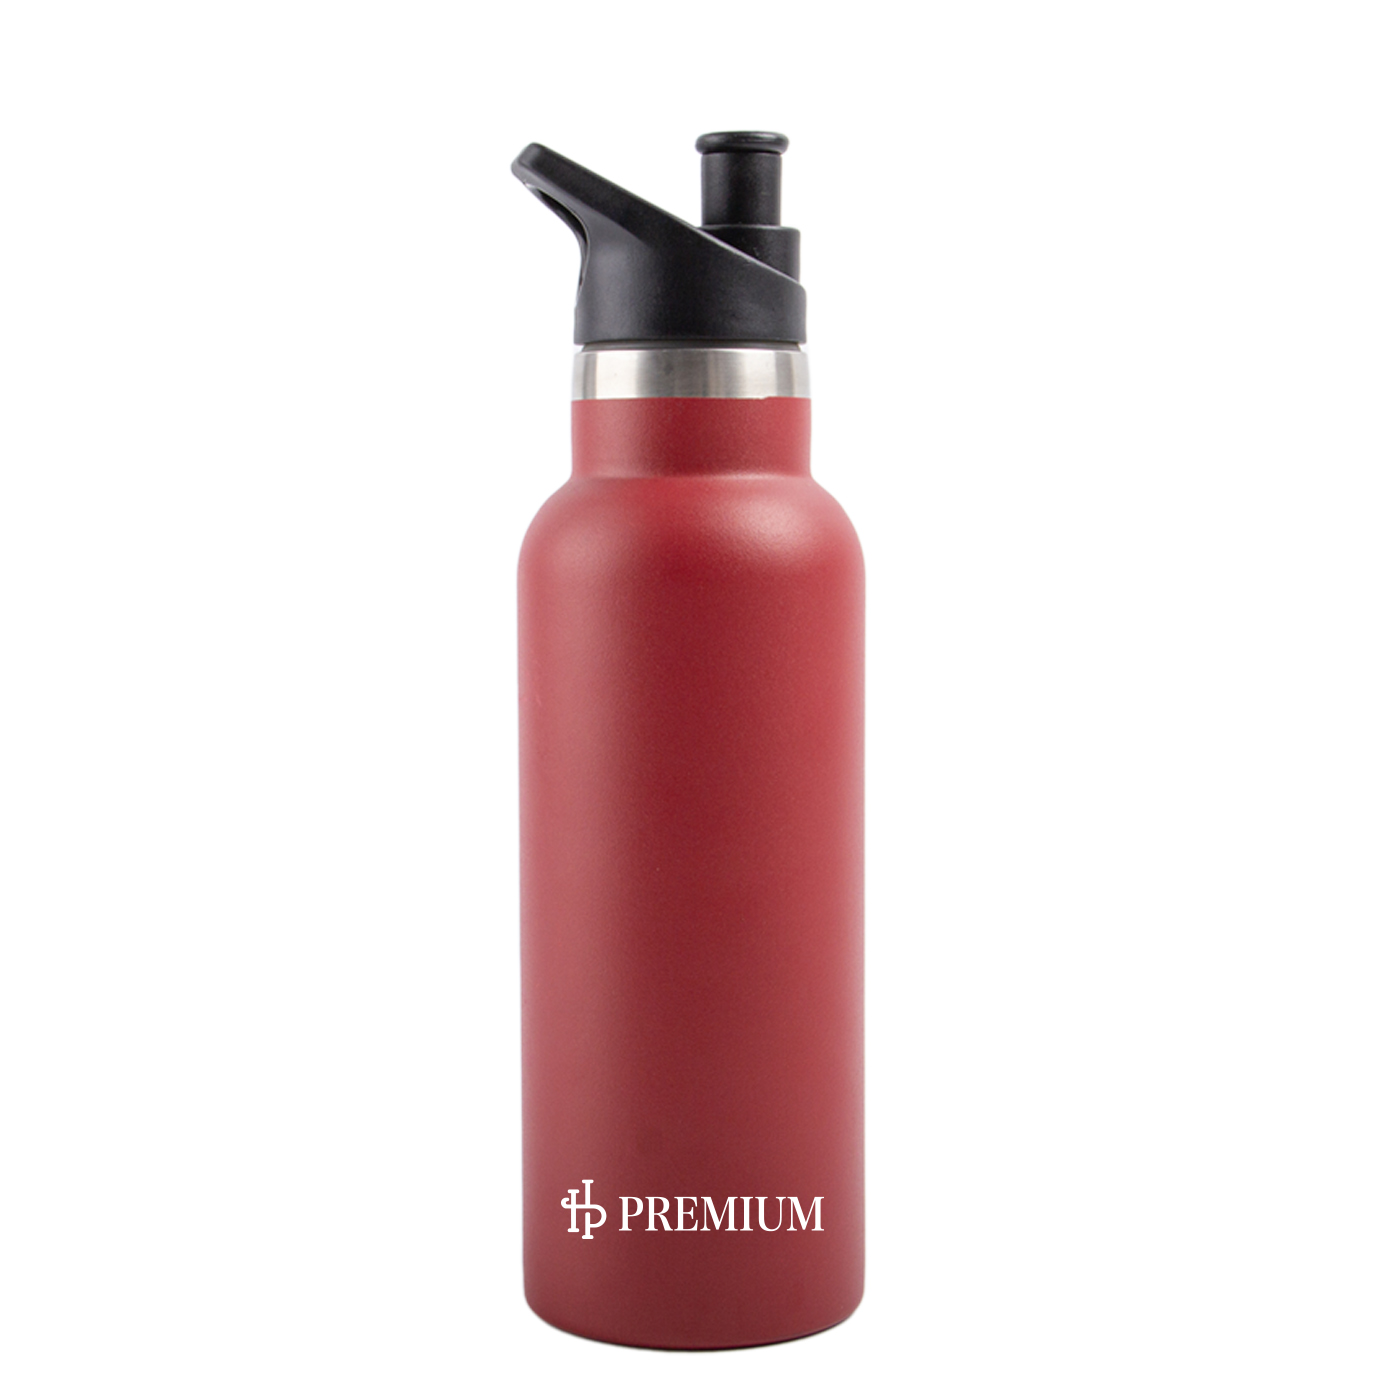 16 oz. Insulated Sport Water Bottle With Straw Lid